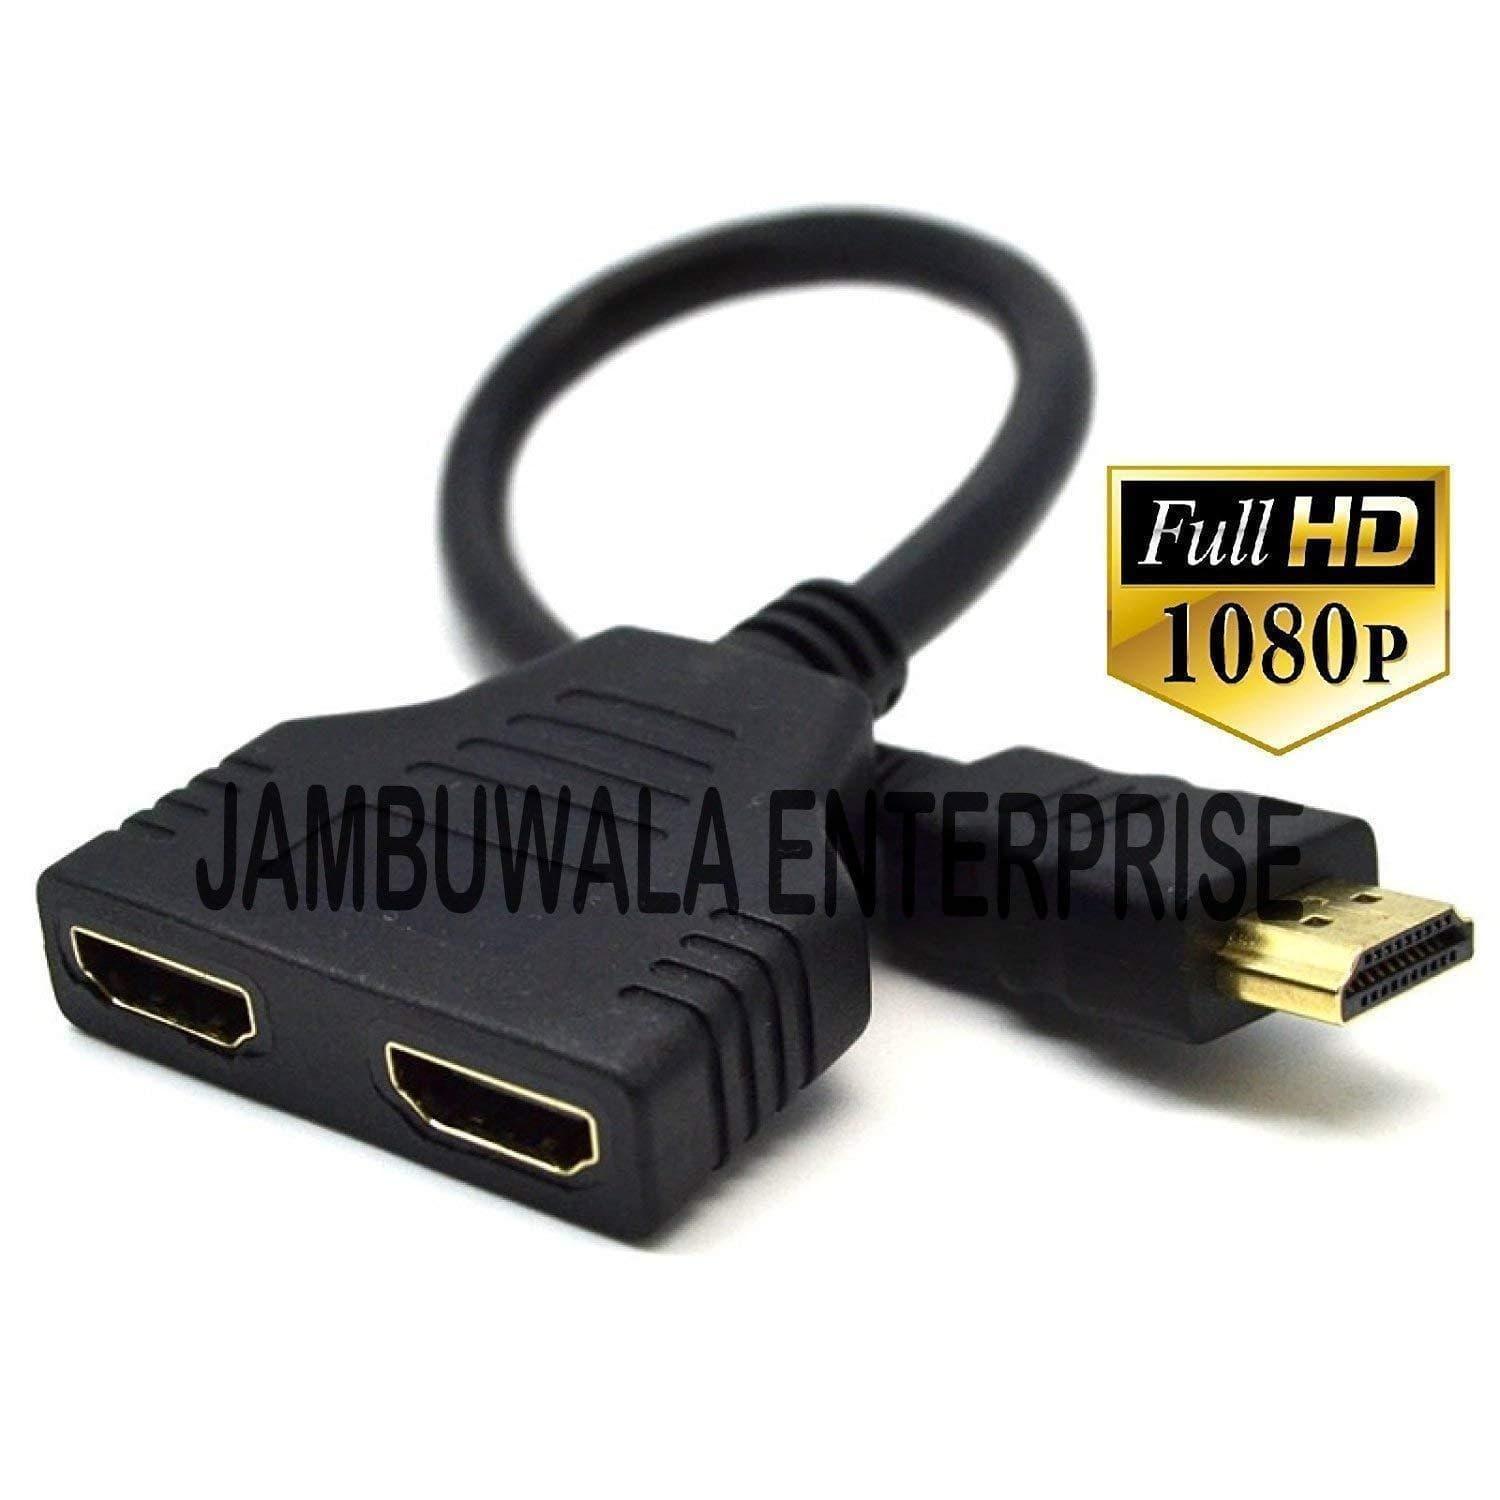 Dealsplant HDMI Male to Dual HDMI Female 1 to 2 Way Hdmi Splitter Cable Adapter-HDMI spliter cable-dealsplant